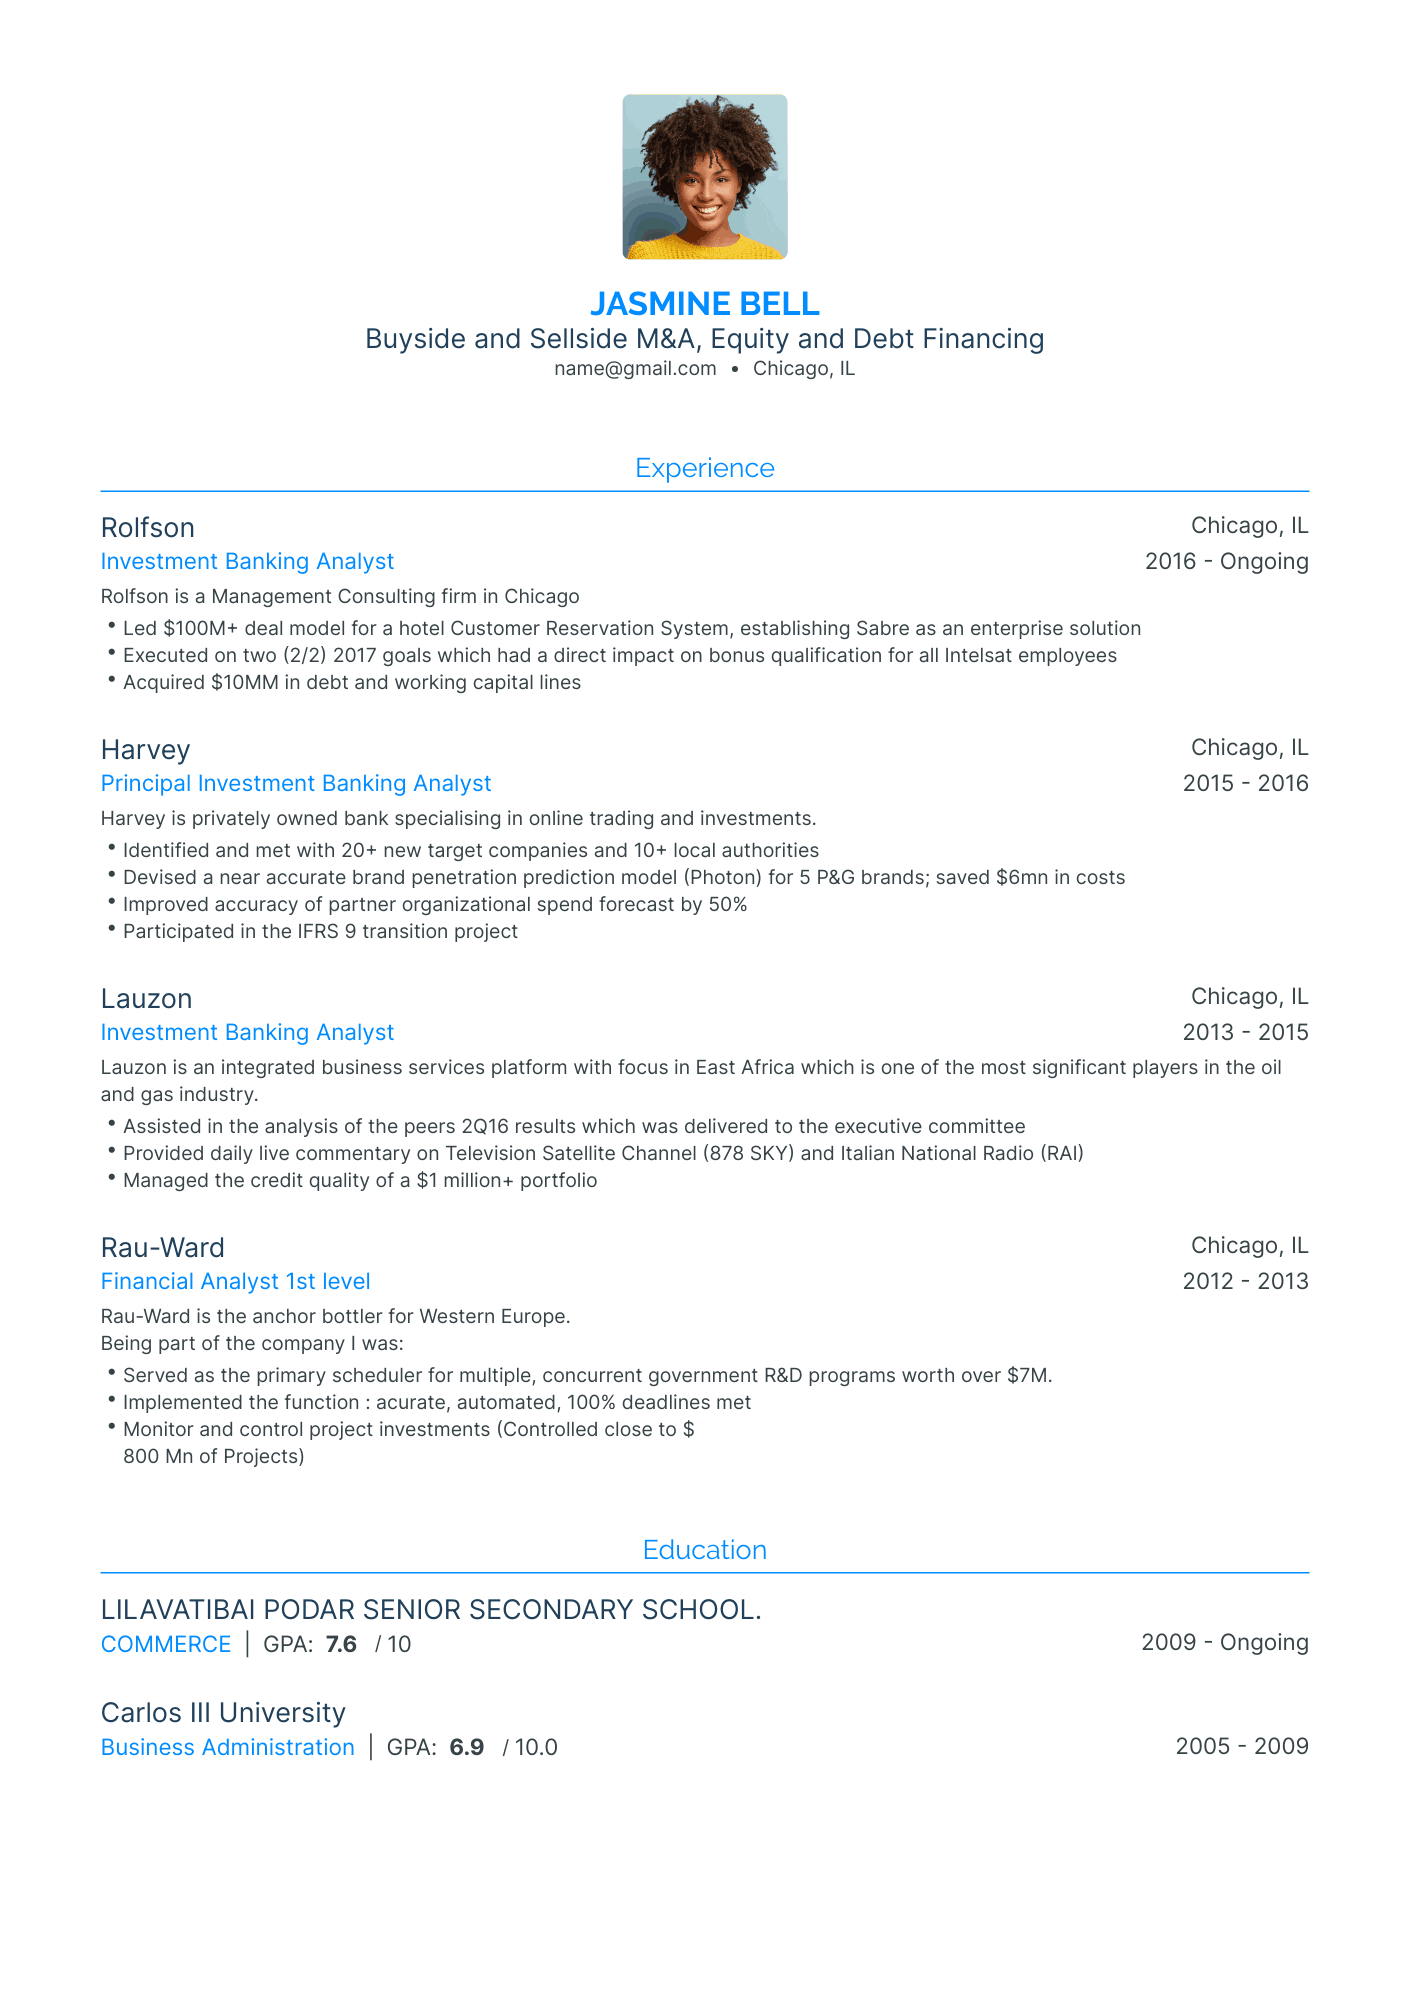 Traditional Investment Banking Analyst Resume Template